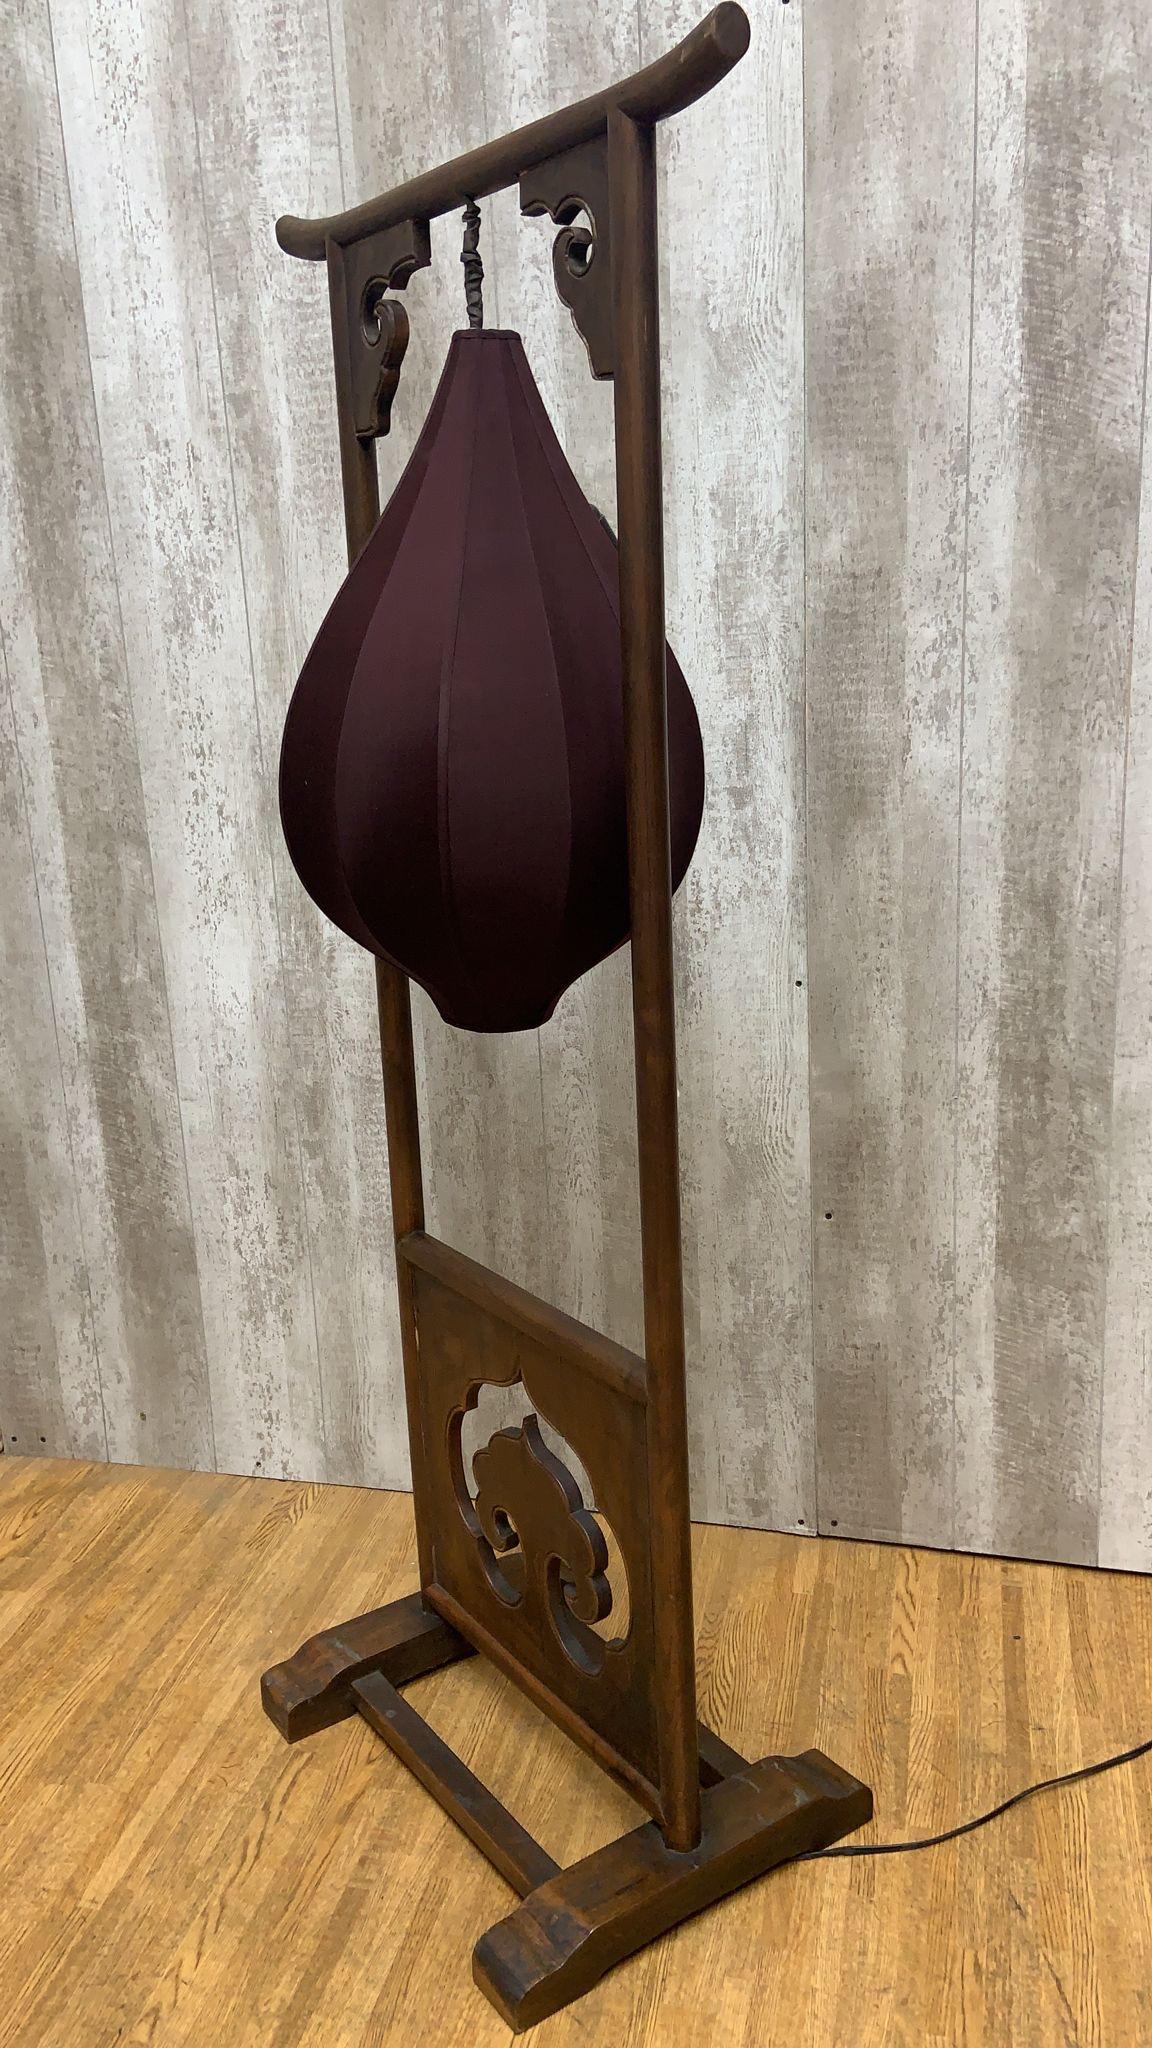 Vintage Shanxi Province Elm Brown Lantern Floor Lamp

This limited edition Vintage Shanxi Province Elm Brown Lantern Floor Lamp is crafted from antique elm that is over a 100 years old. It is stained with natural color and lacquer. It creates an